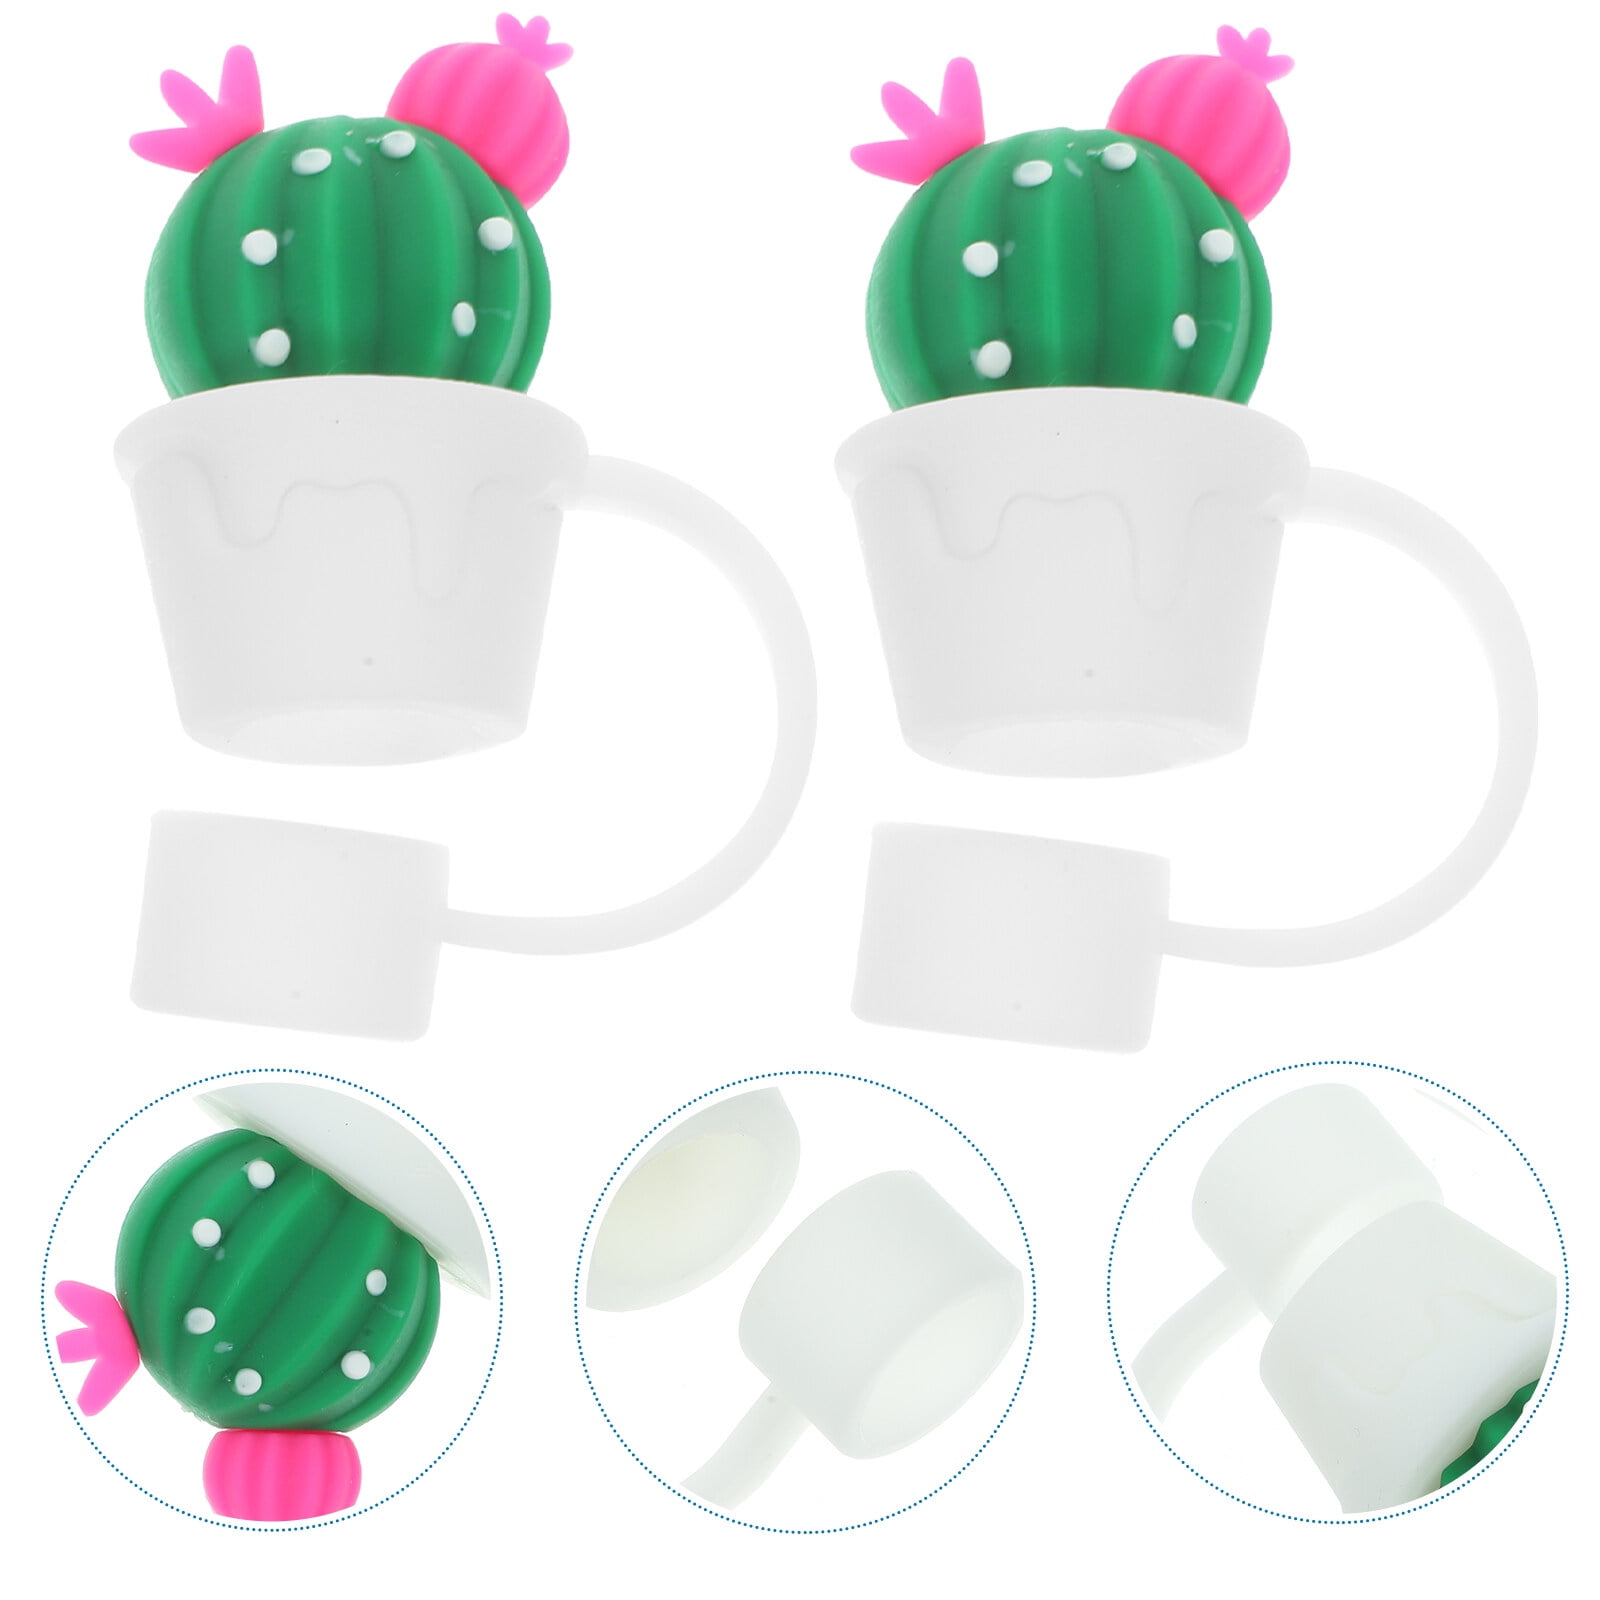 Blue Cactus Straw Topper